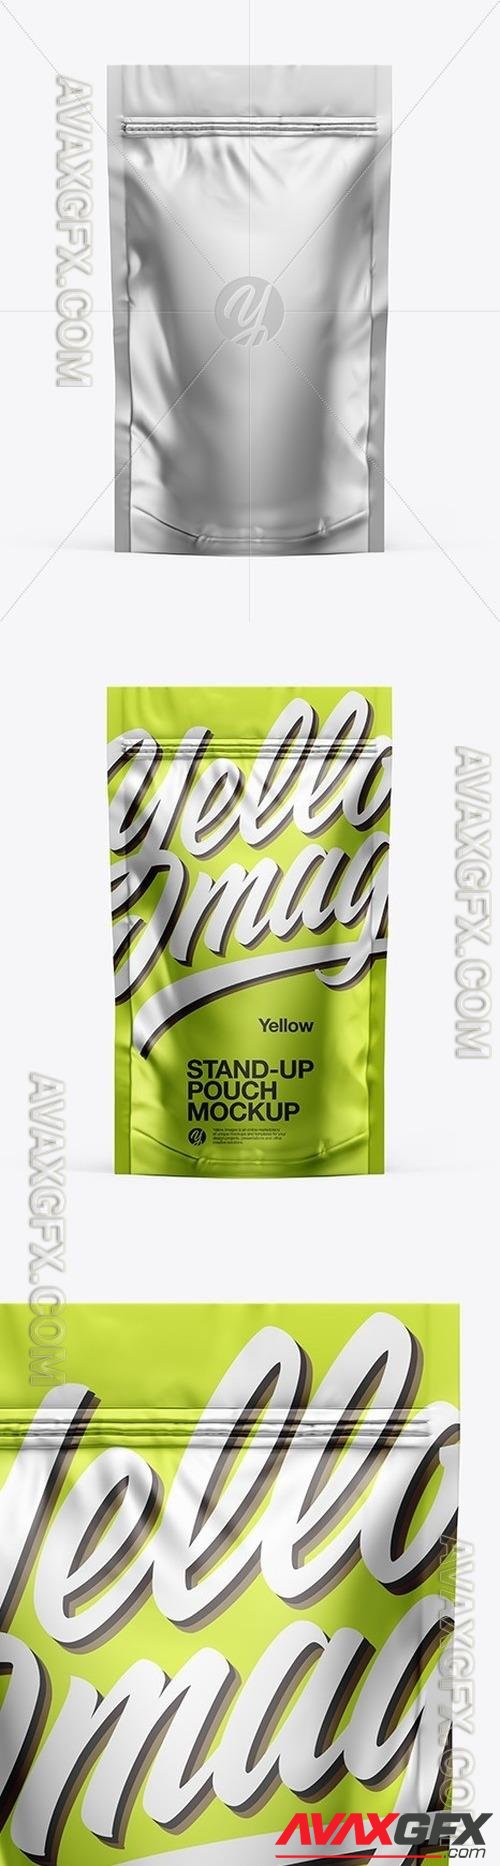 Metallic Stand-Up Pouch Mockup 49979 TIF